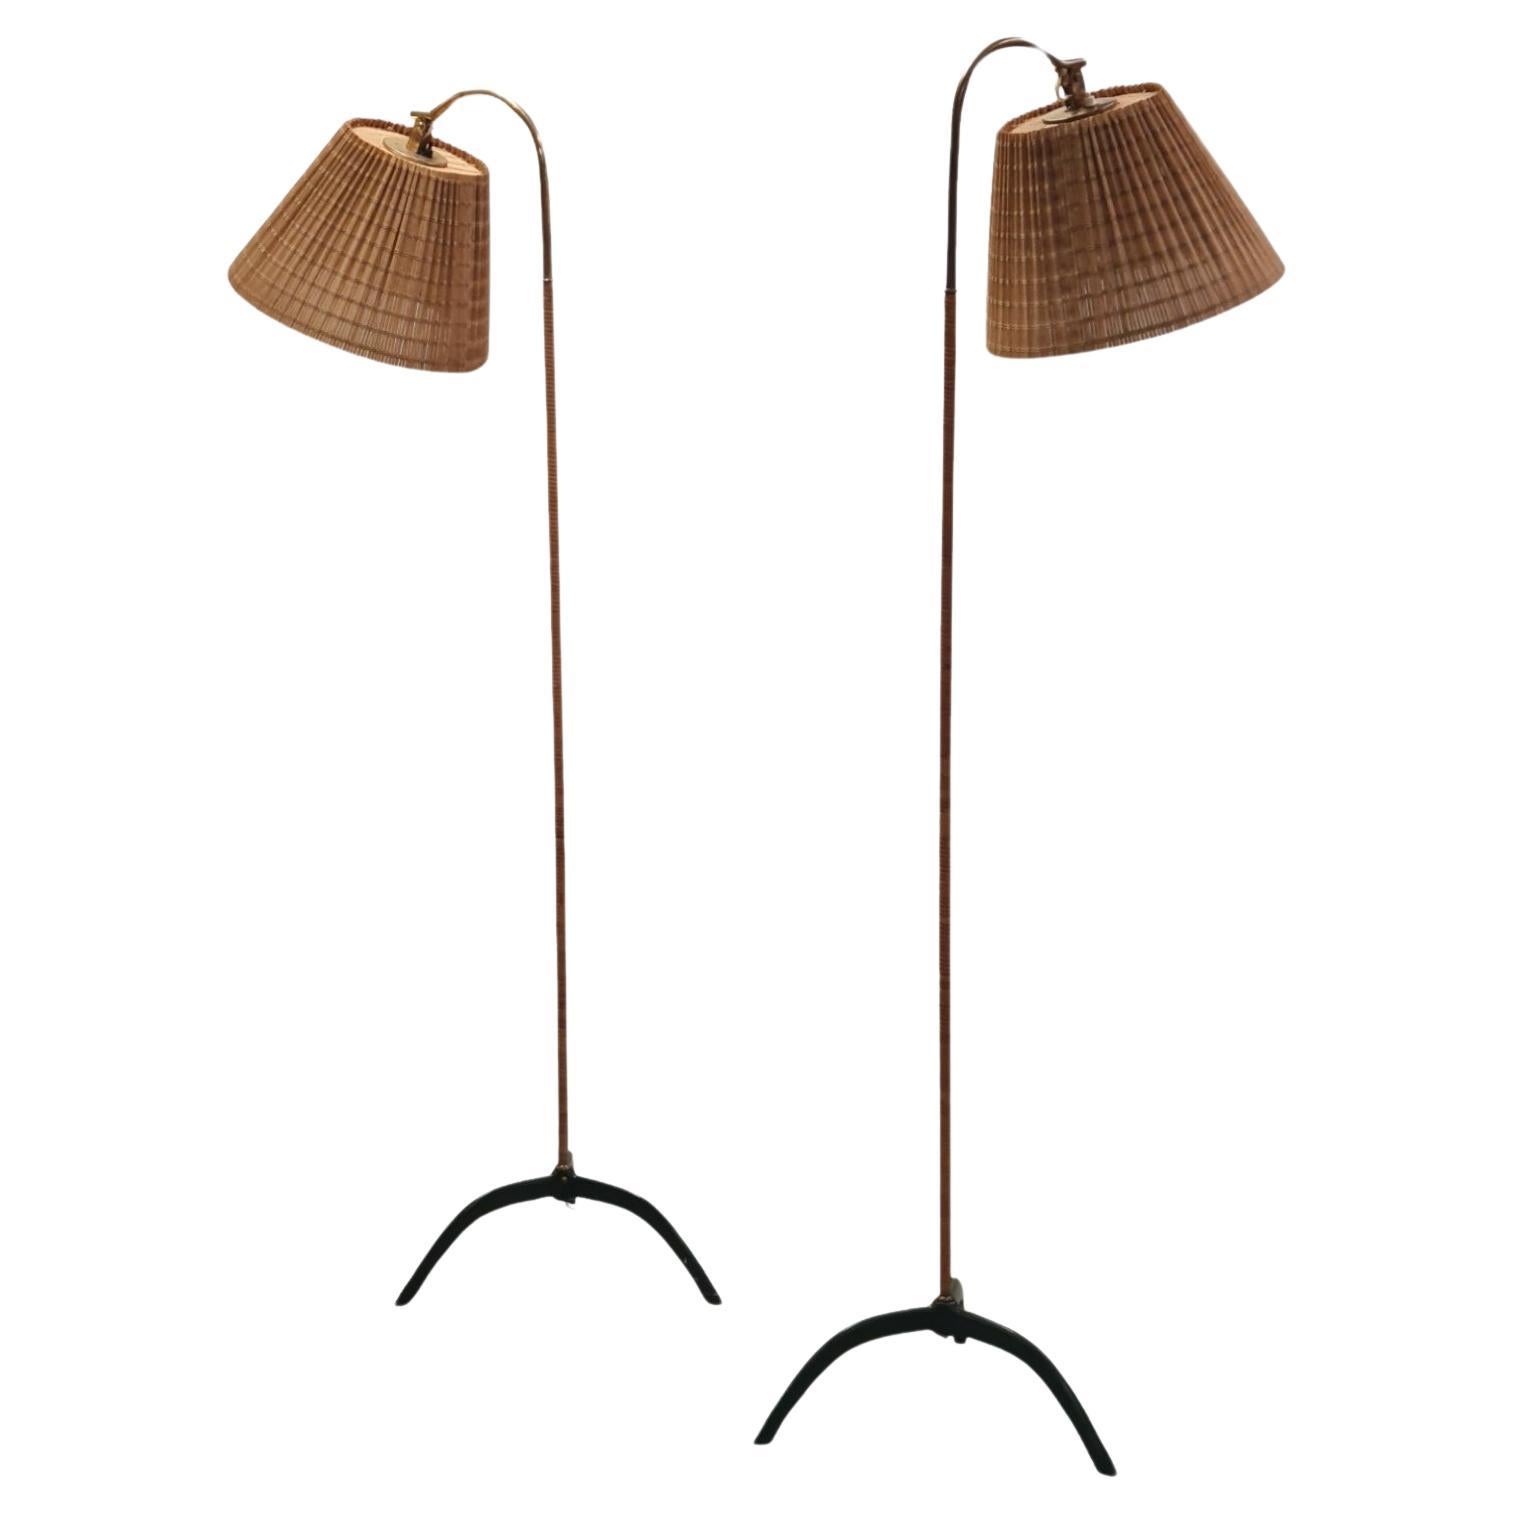 A Pair of Paavo Tynell Floor Lamps model. 9609, Taito Oy